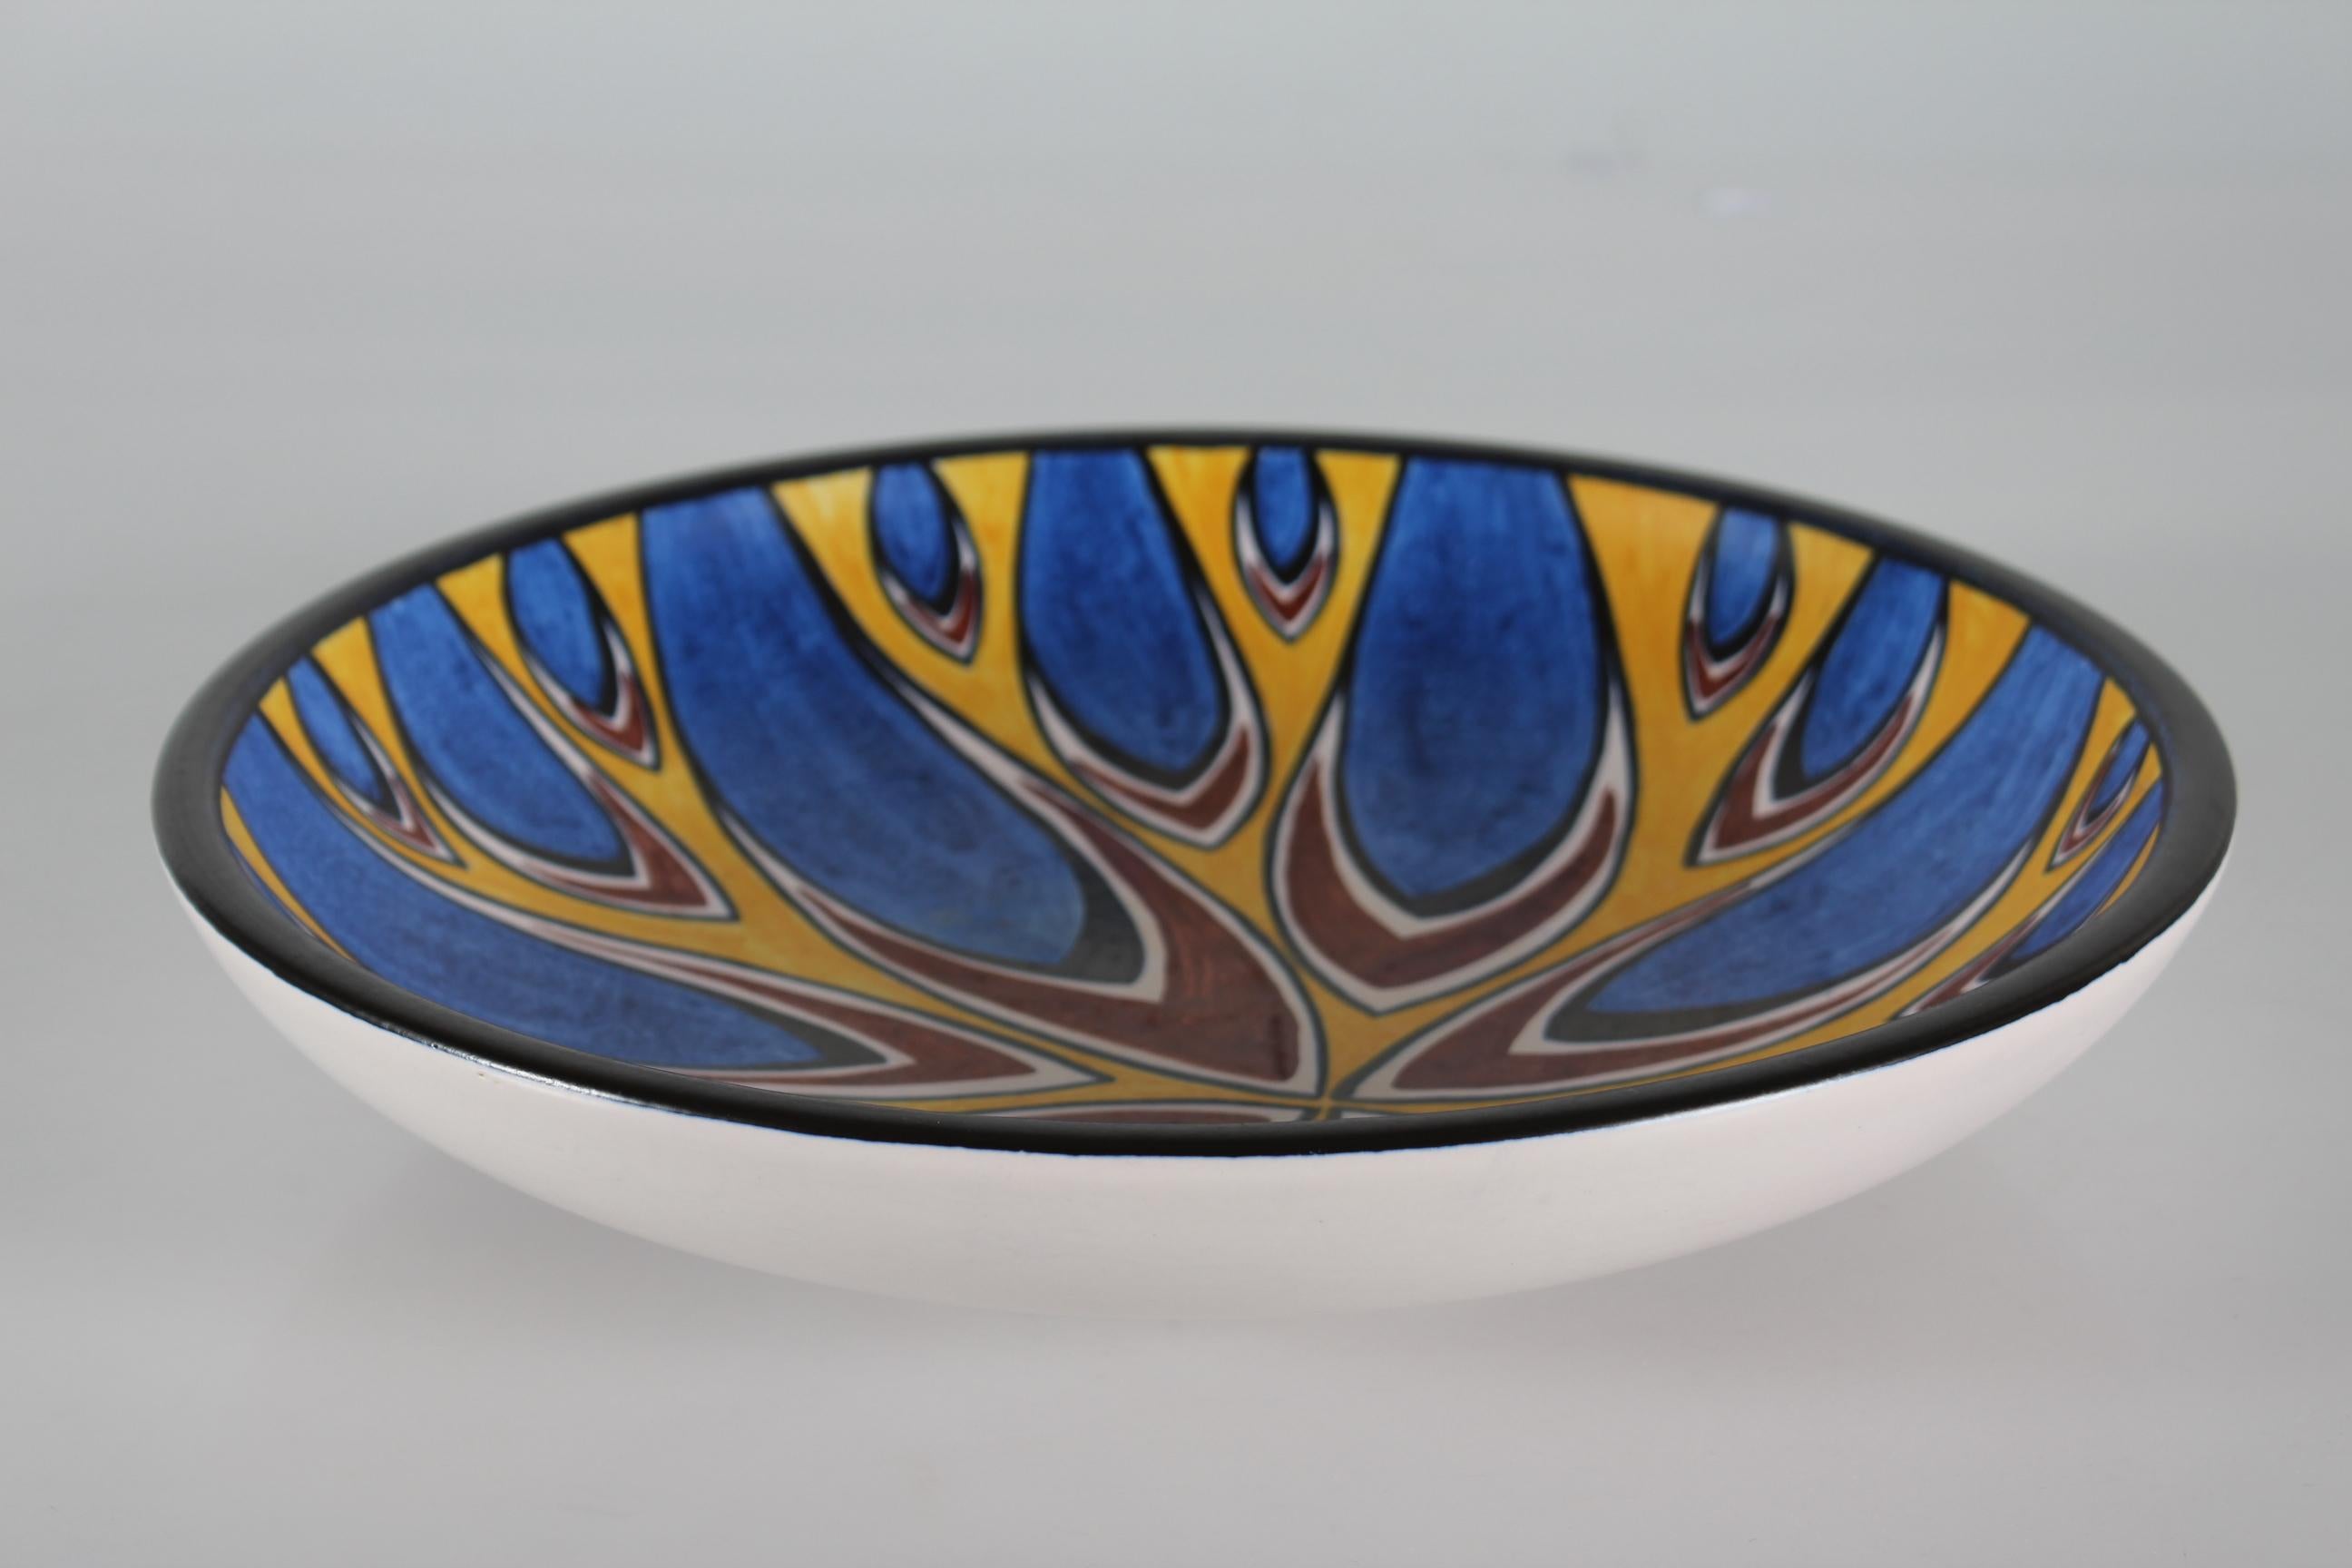 Large low ceramic bowl by Søholm Denmark.
This bowl has a graphic pattern in bright colors of blue, yellow, brown and black. The glaze is matte, the outside of the bowl has white glaze and the rim is black.

The bowl is signed Søholm on the